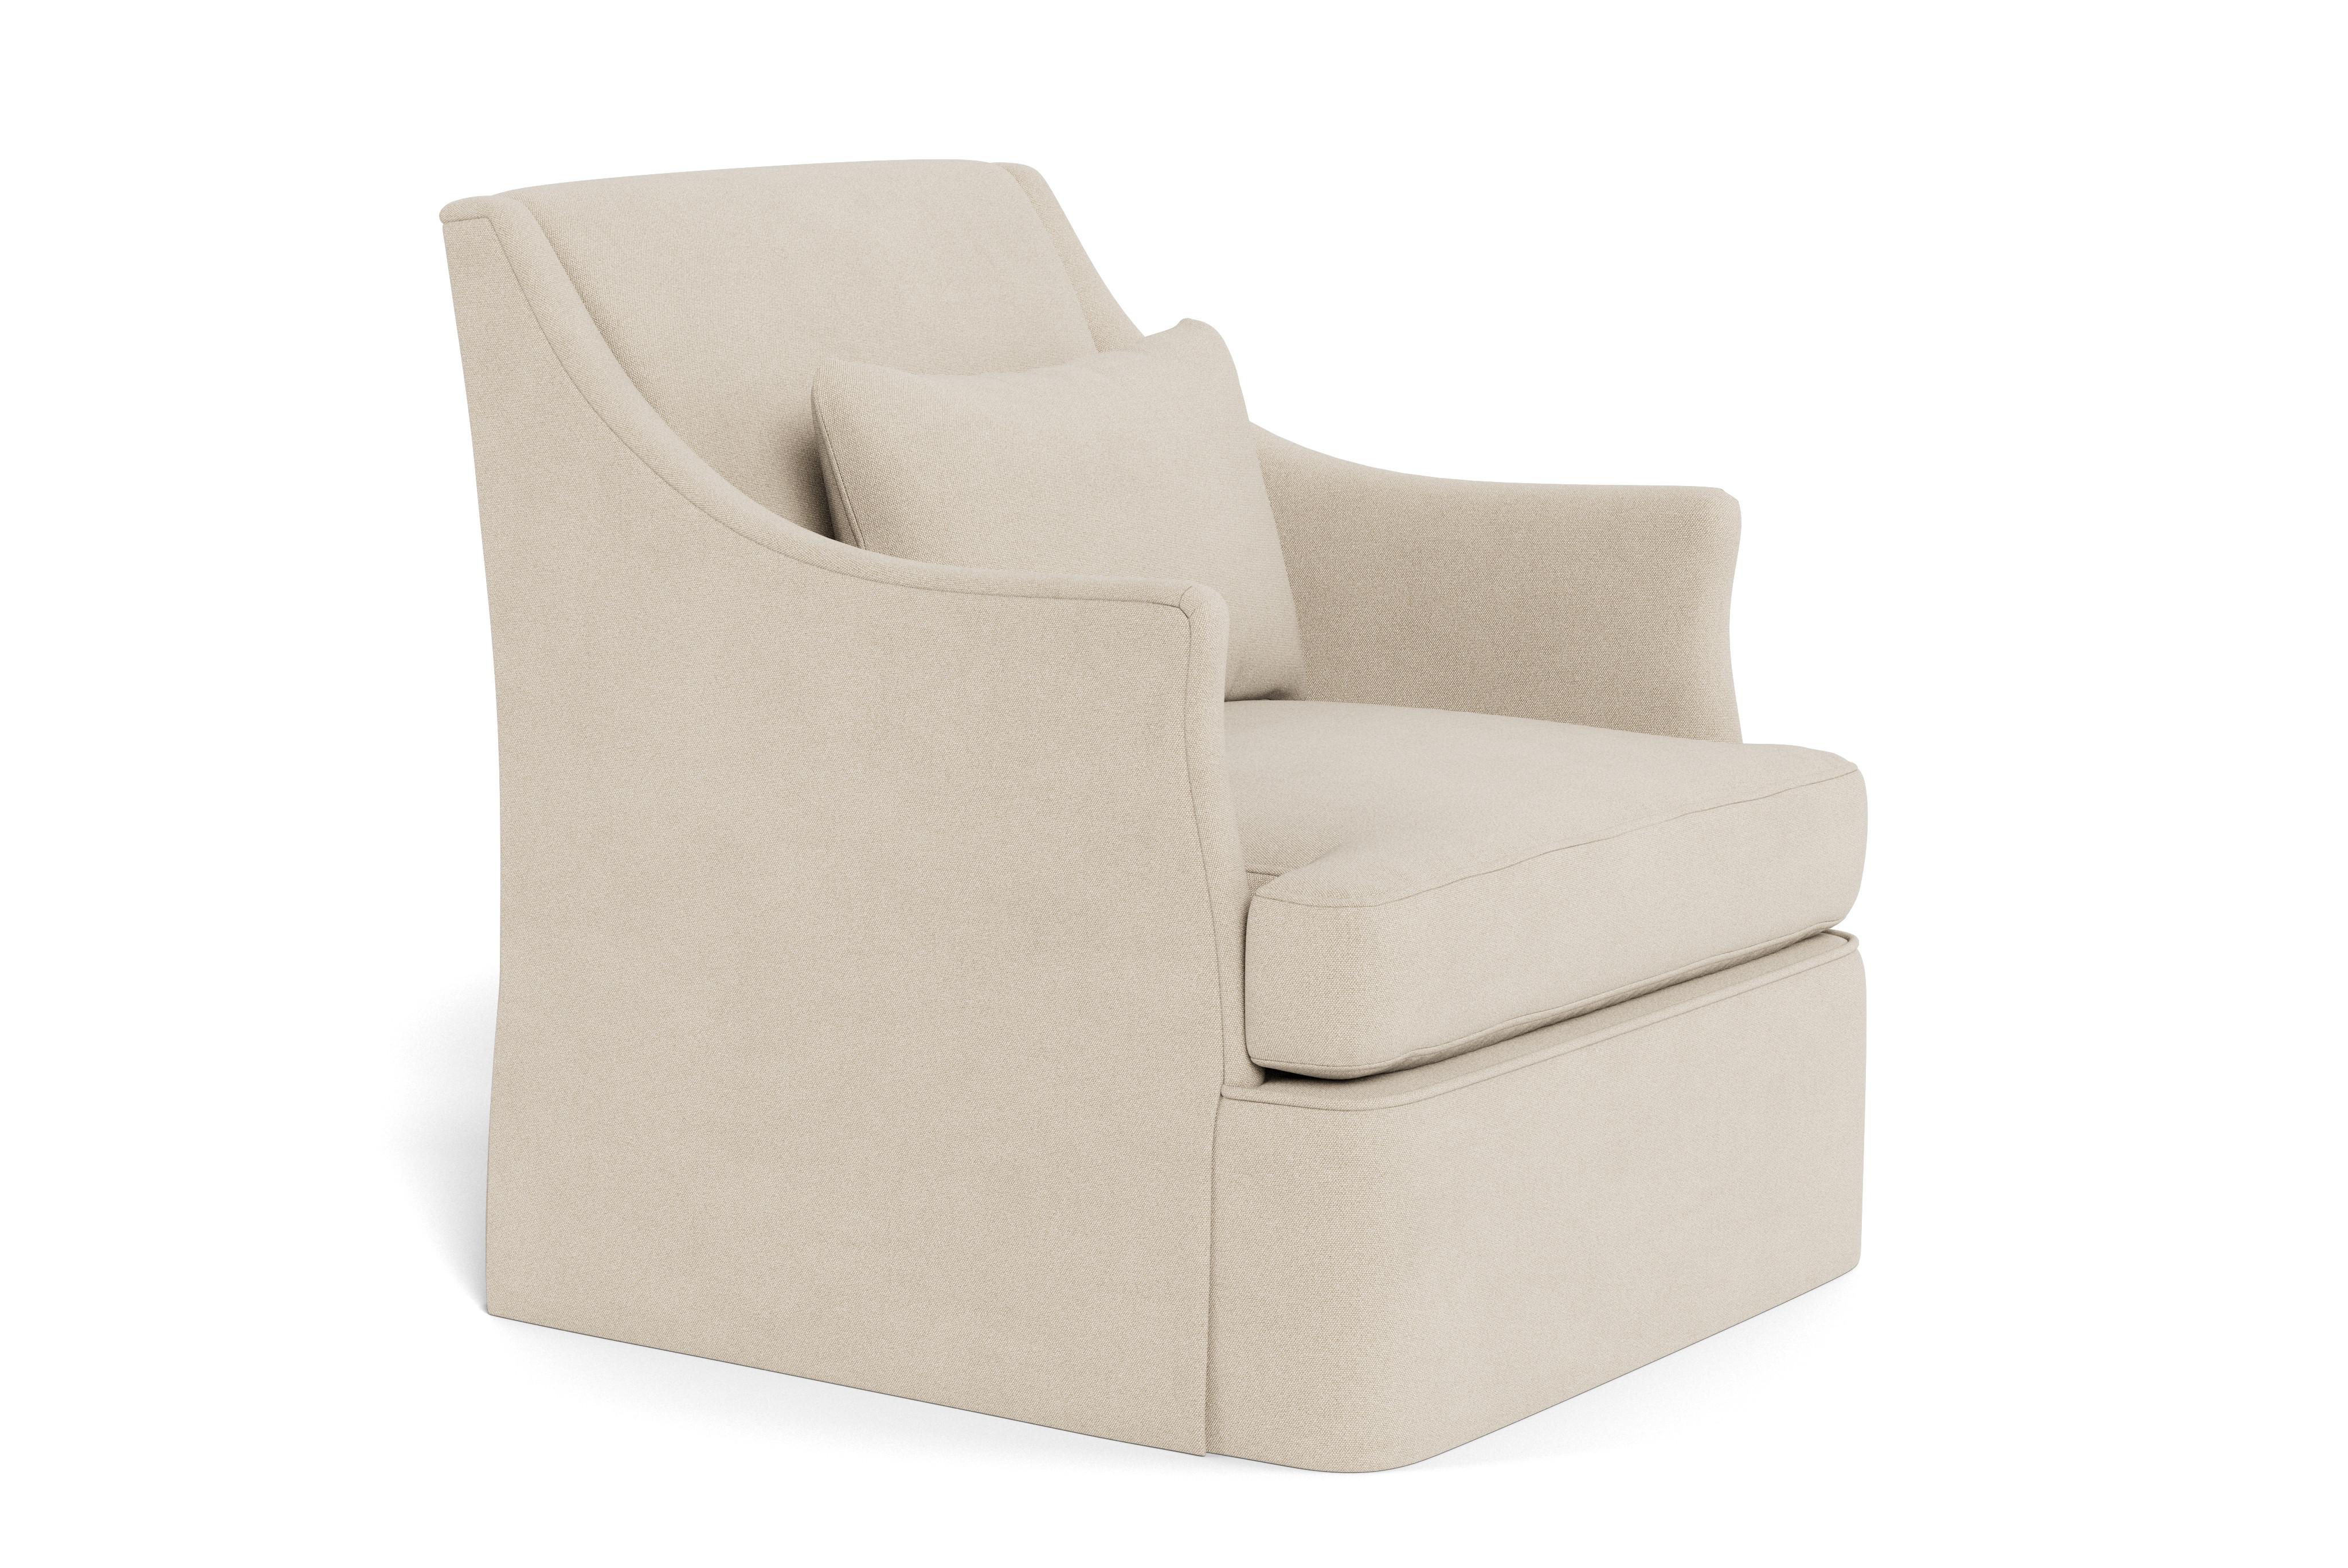 American Bunny Williams Home Bowen Armchair, Solid Linen/Oatmeal For Sale